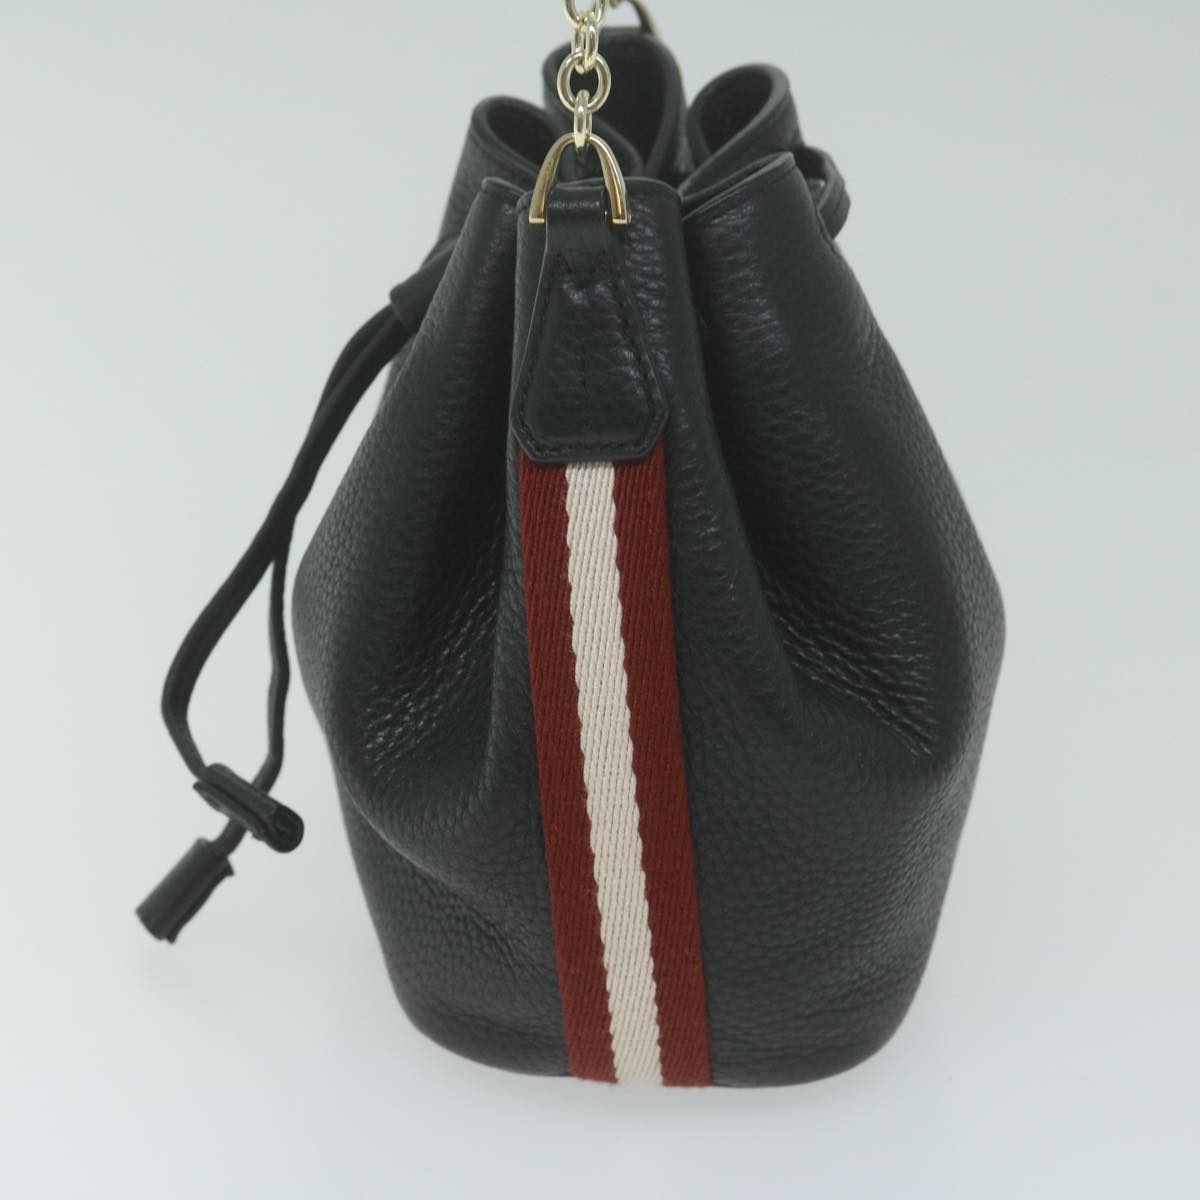 BALLY Purse Chain Shoulder Bag Leather 2way Black Red white Auth yk10562